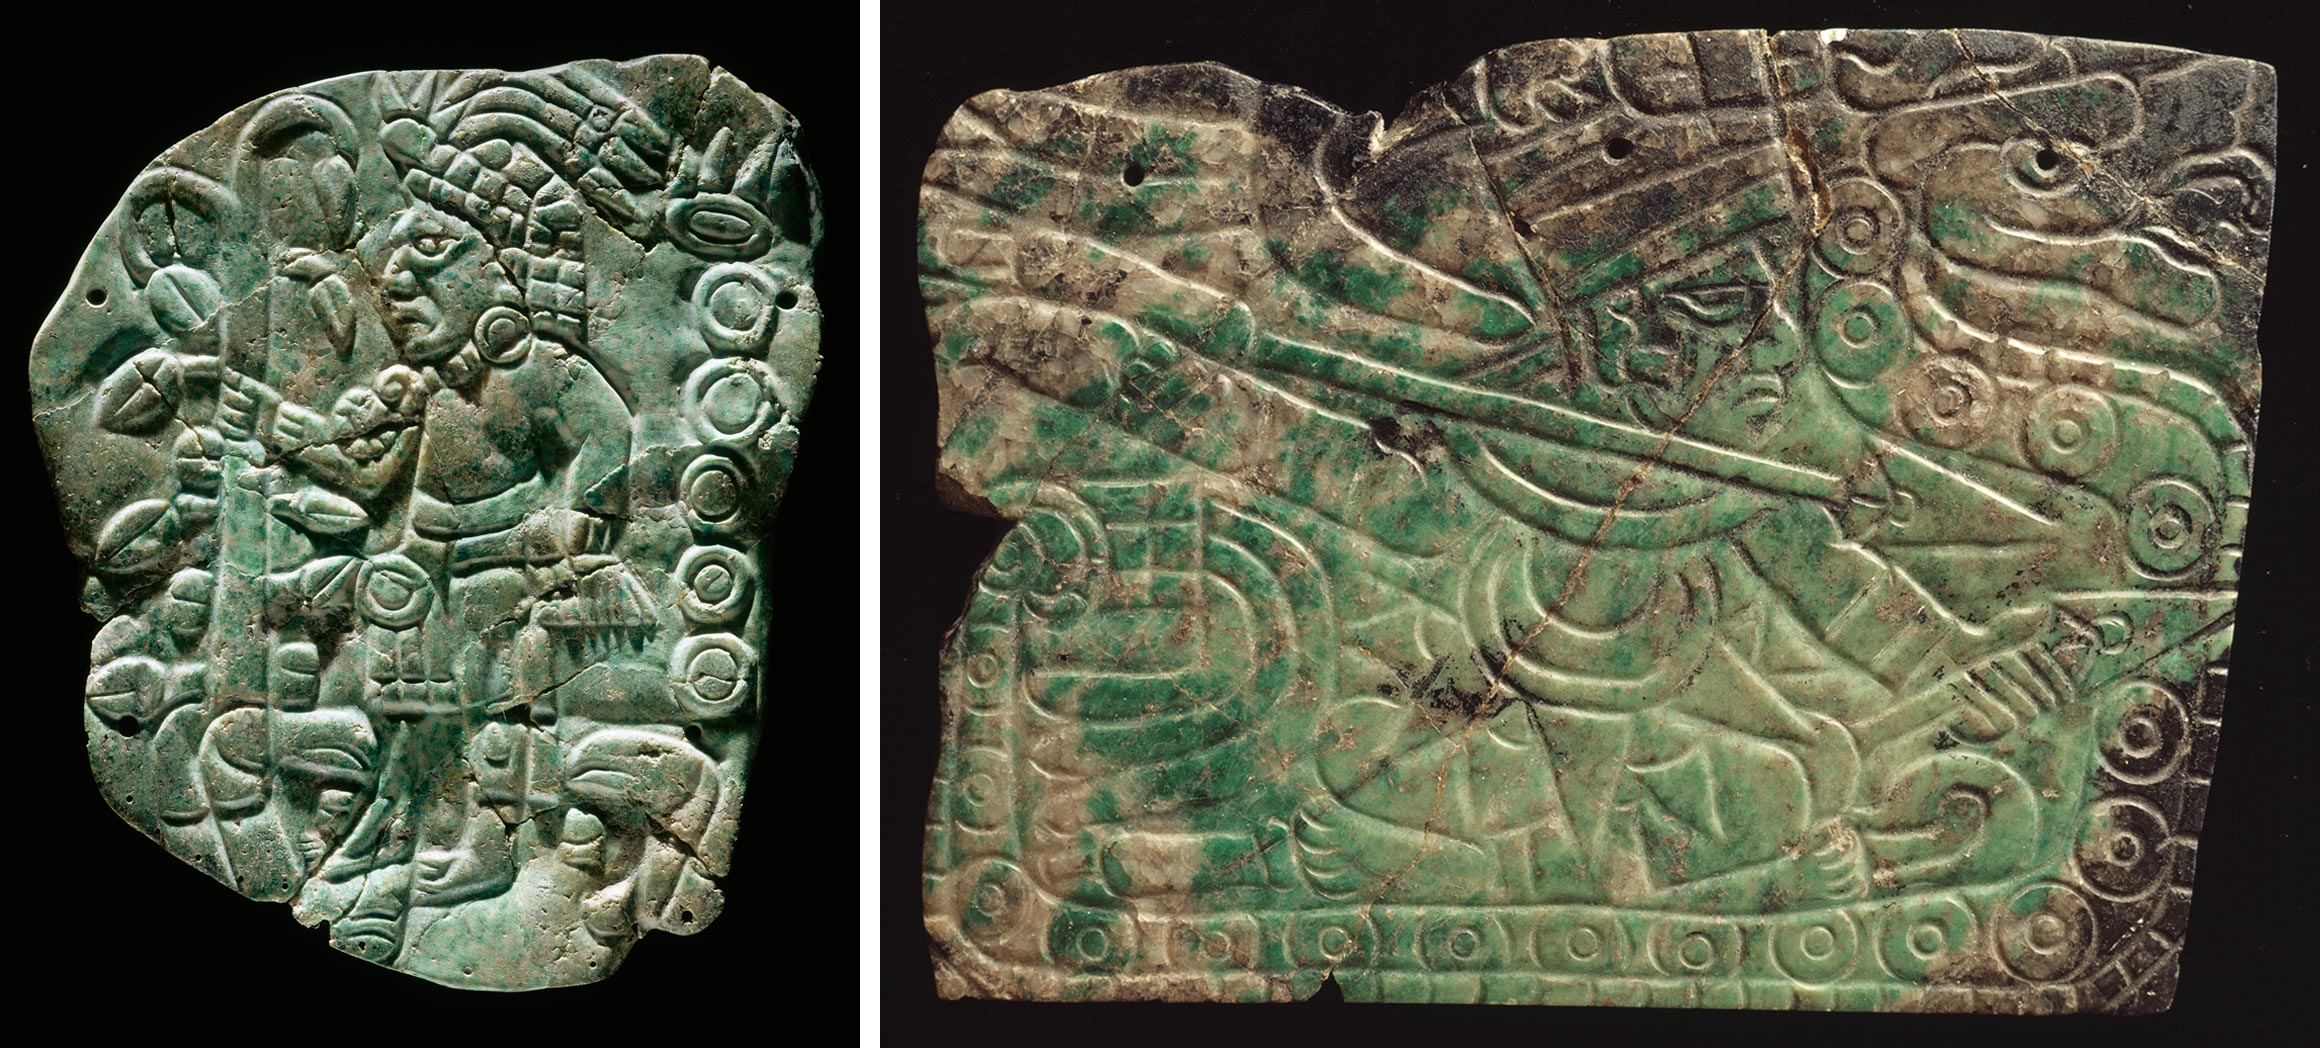 Two jadeite plaques from the Sacred Cenote of Chichen Itza